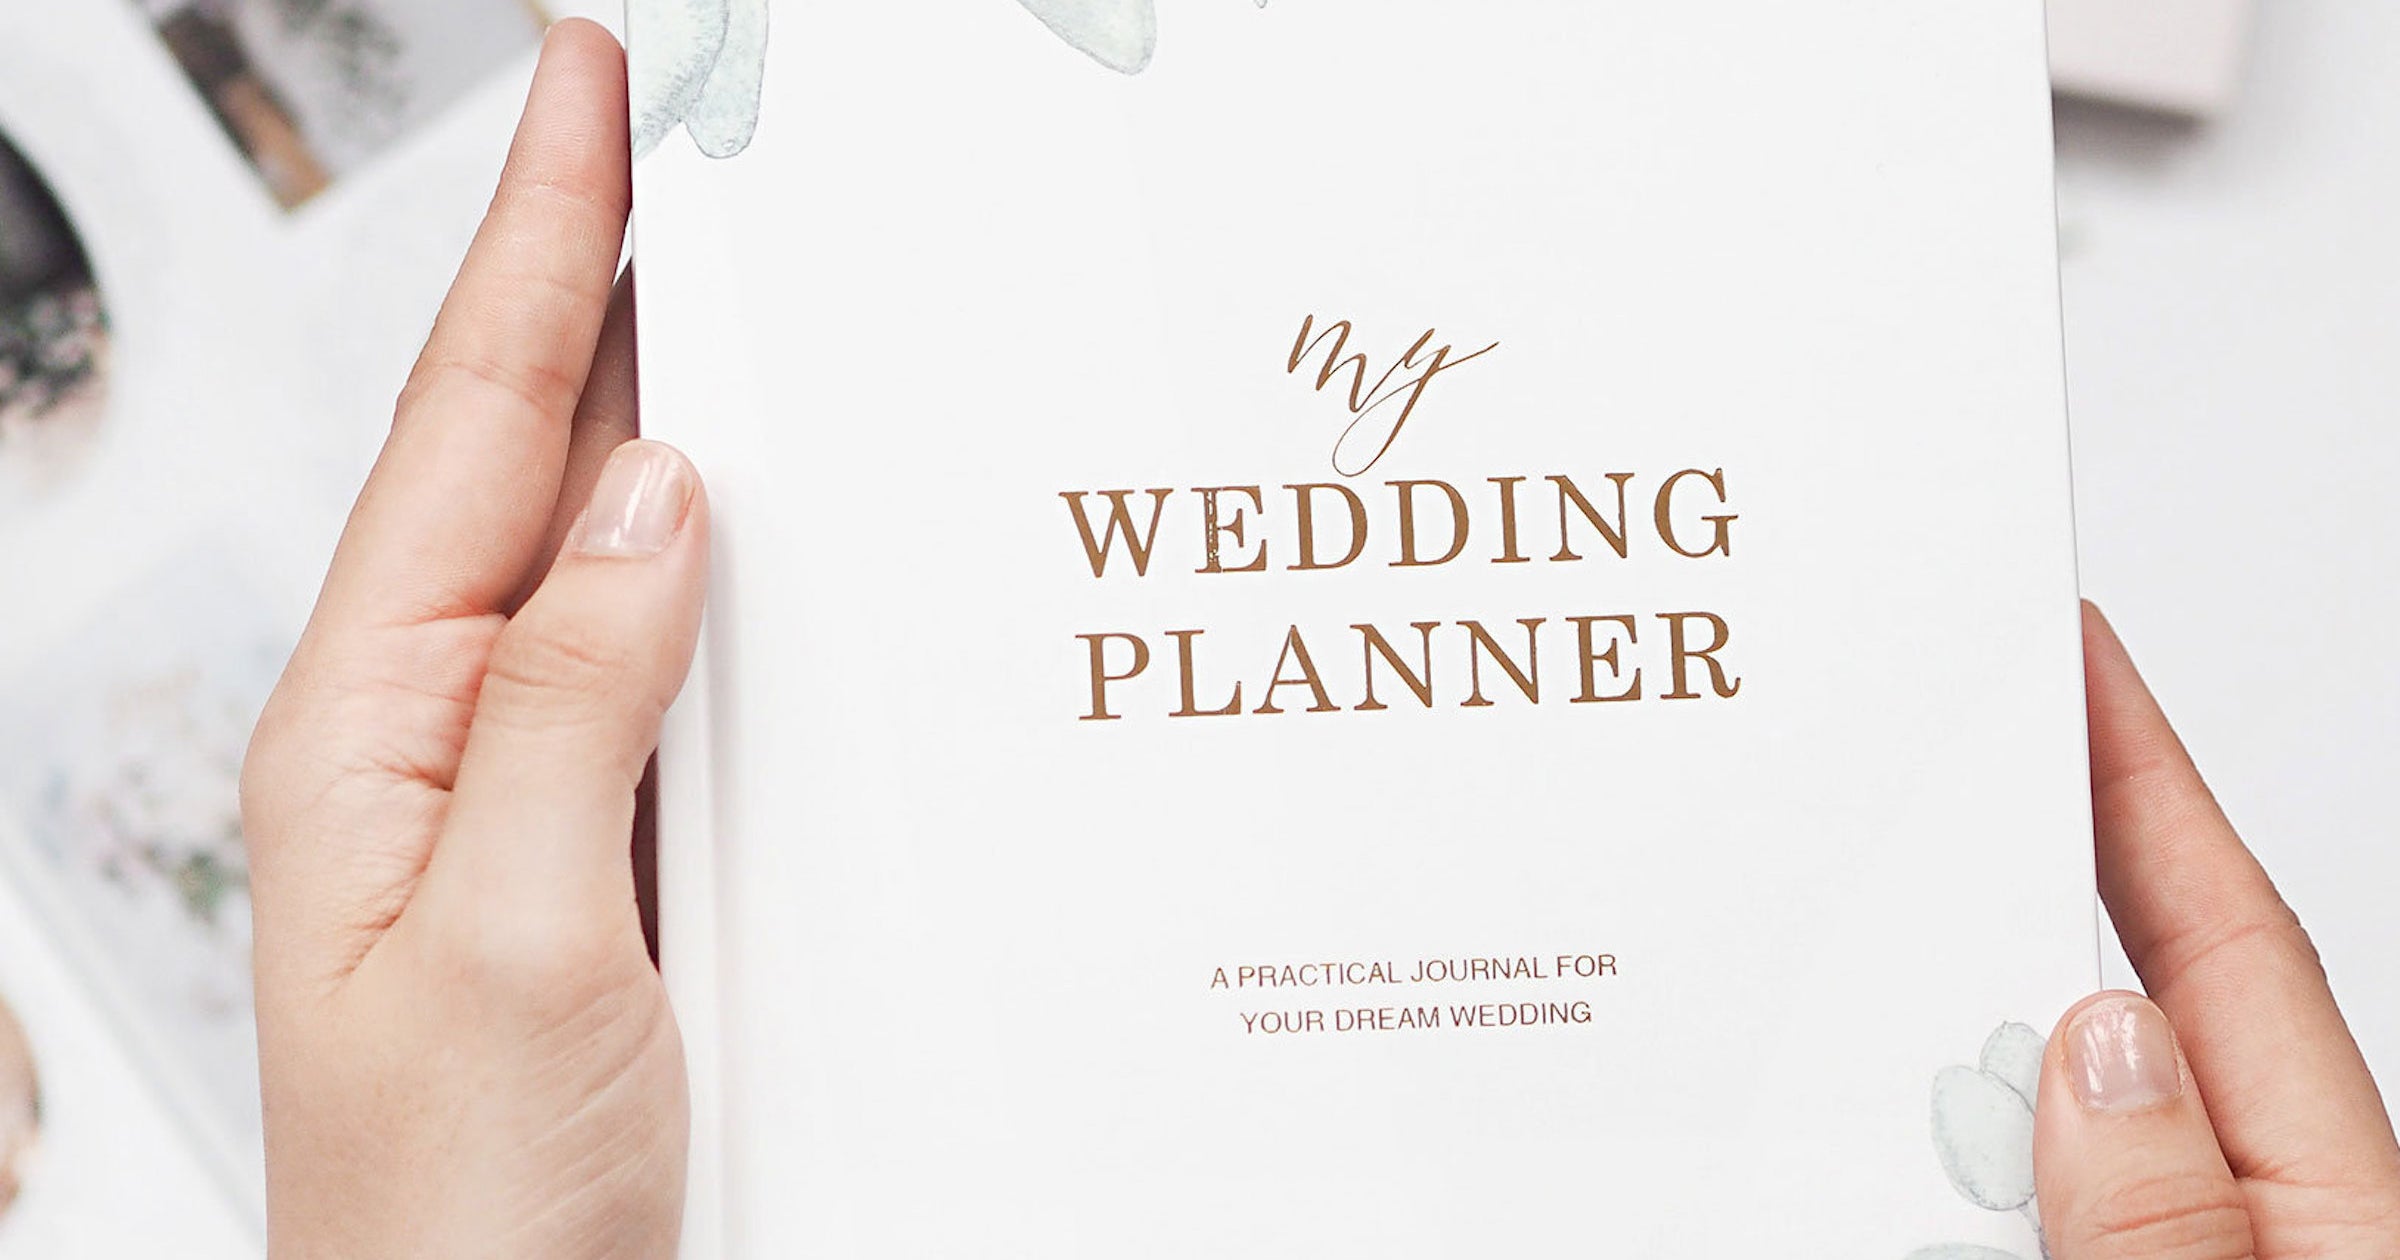 The Budget-Savvy Wedding Planner & Organizer: Checklists, Worksheets, and Essential Tools to Plan the Perfect Wedding on a Small Budget [Book]